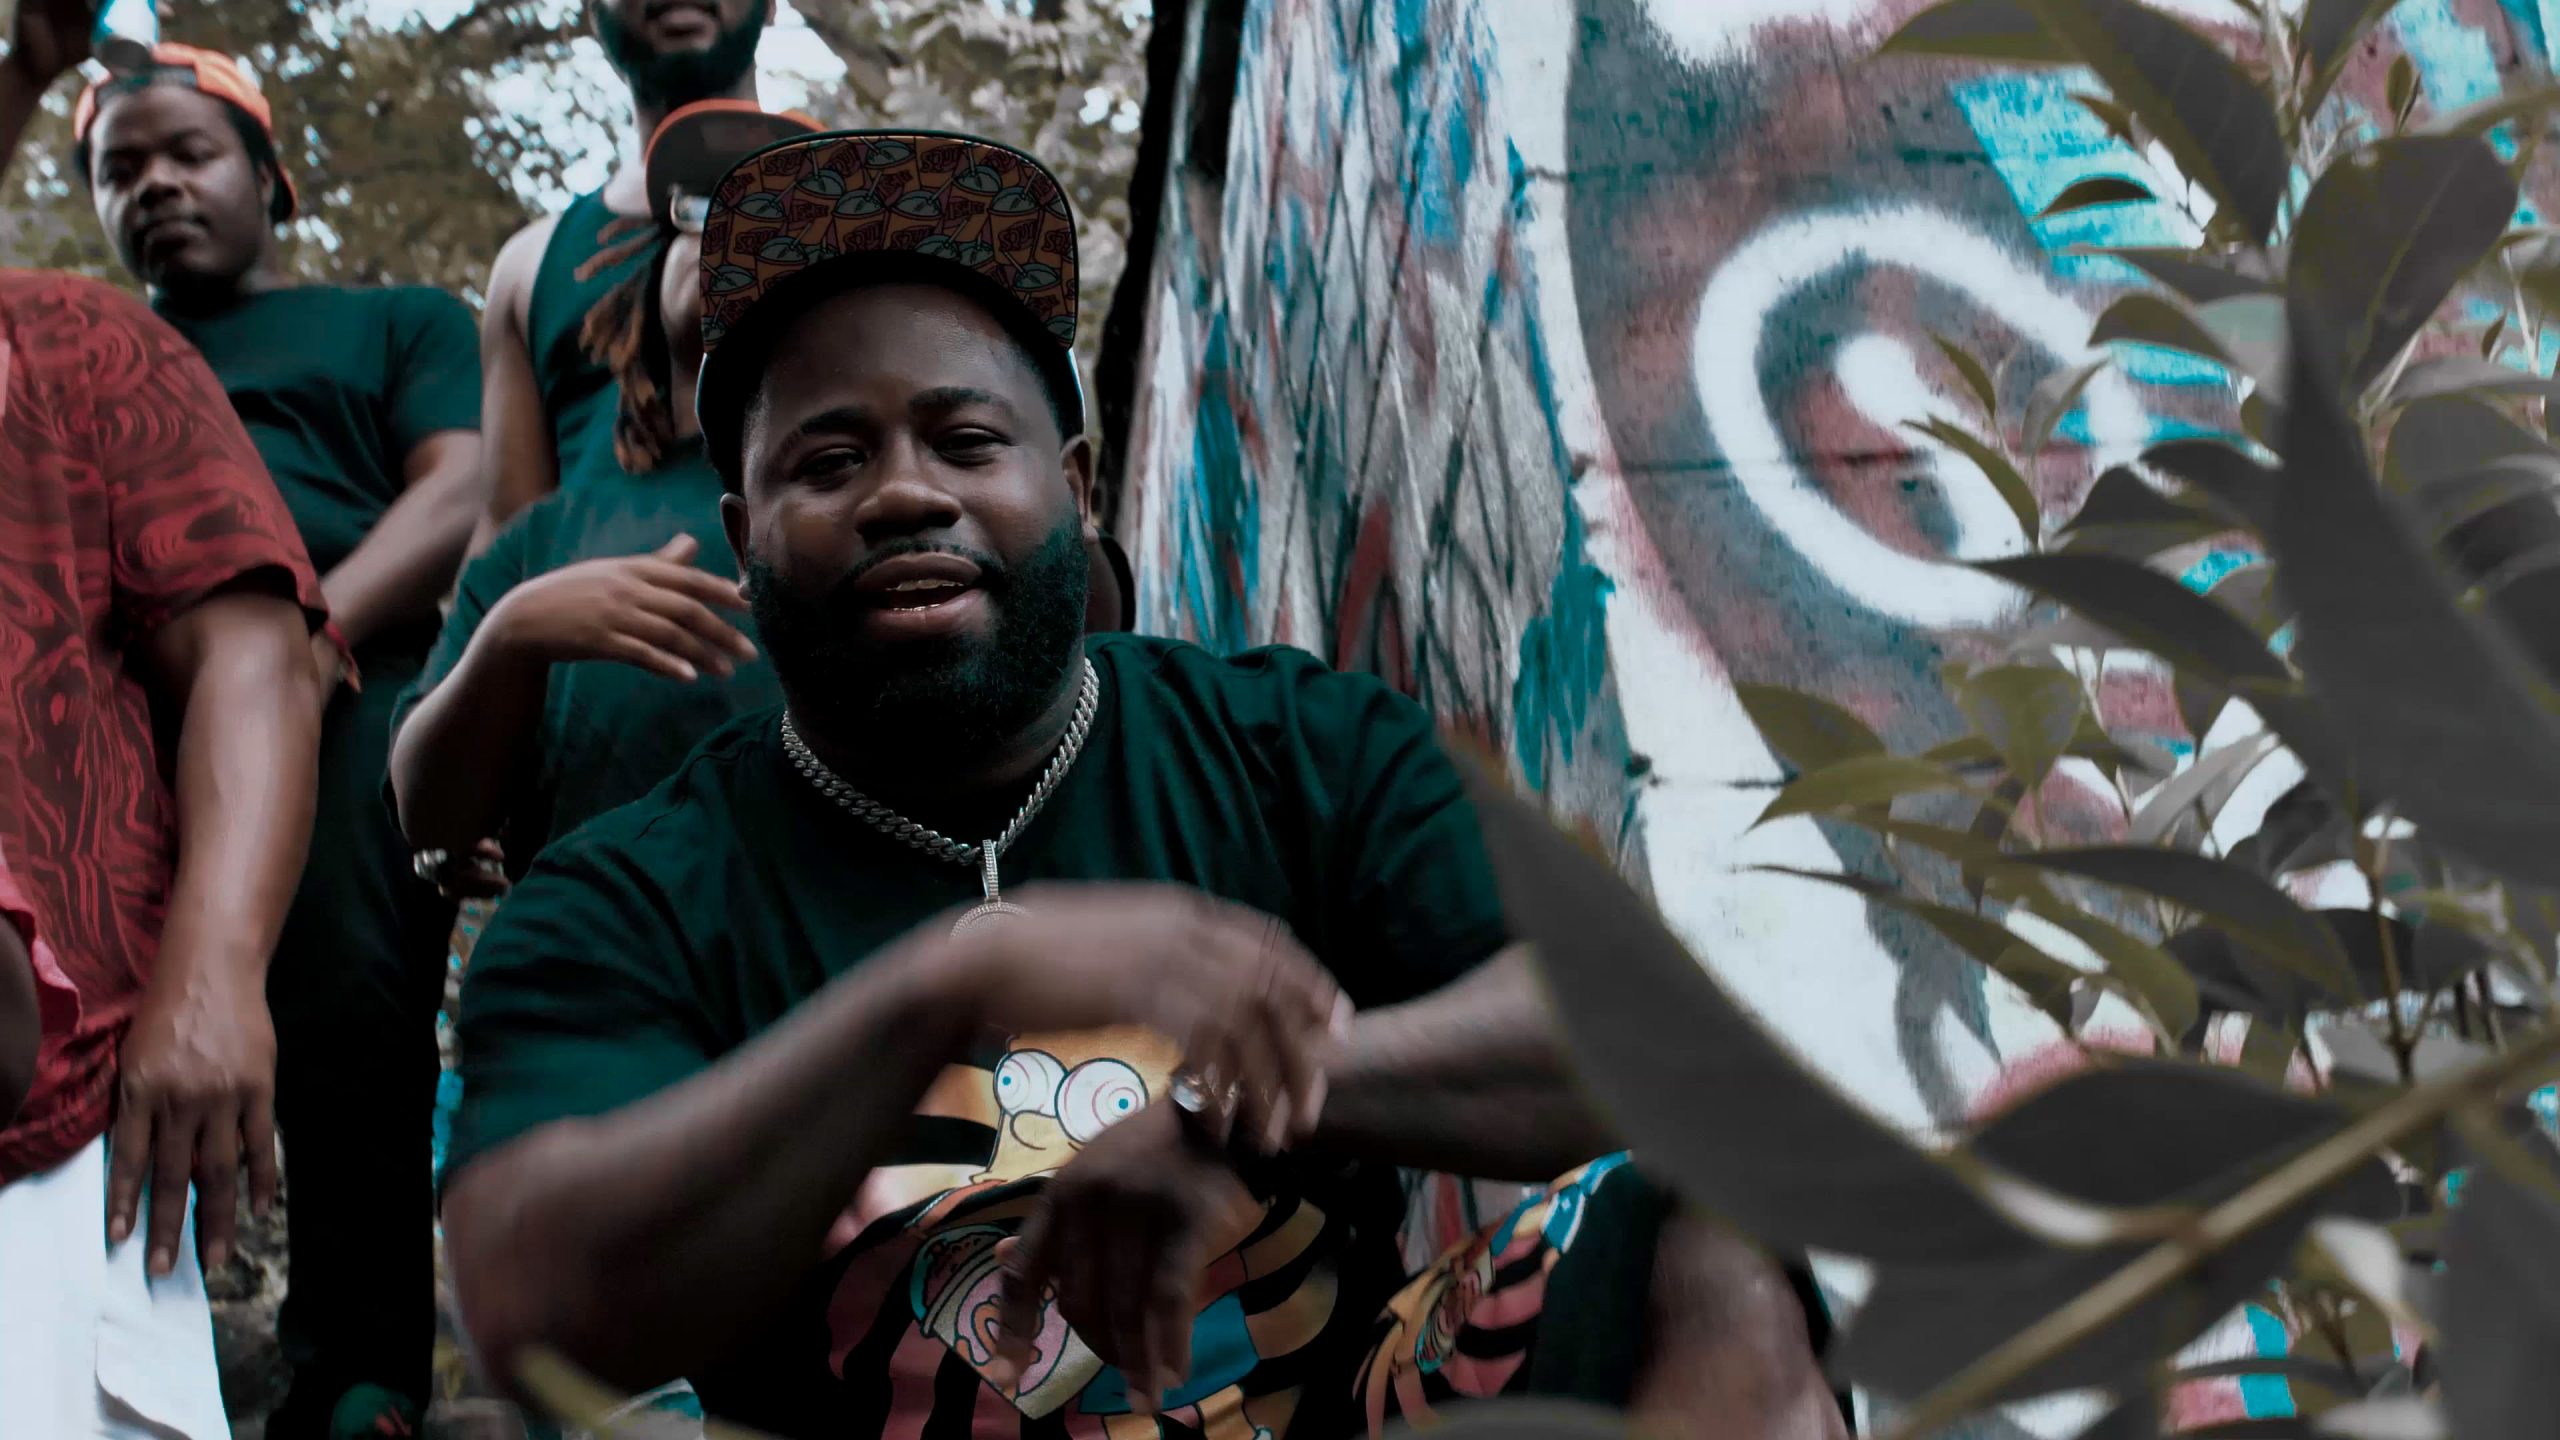 ‘MYBROTHERSKEEPER’ is the new single from ‘J profitts’ X Mr.365. Check out the video.